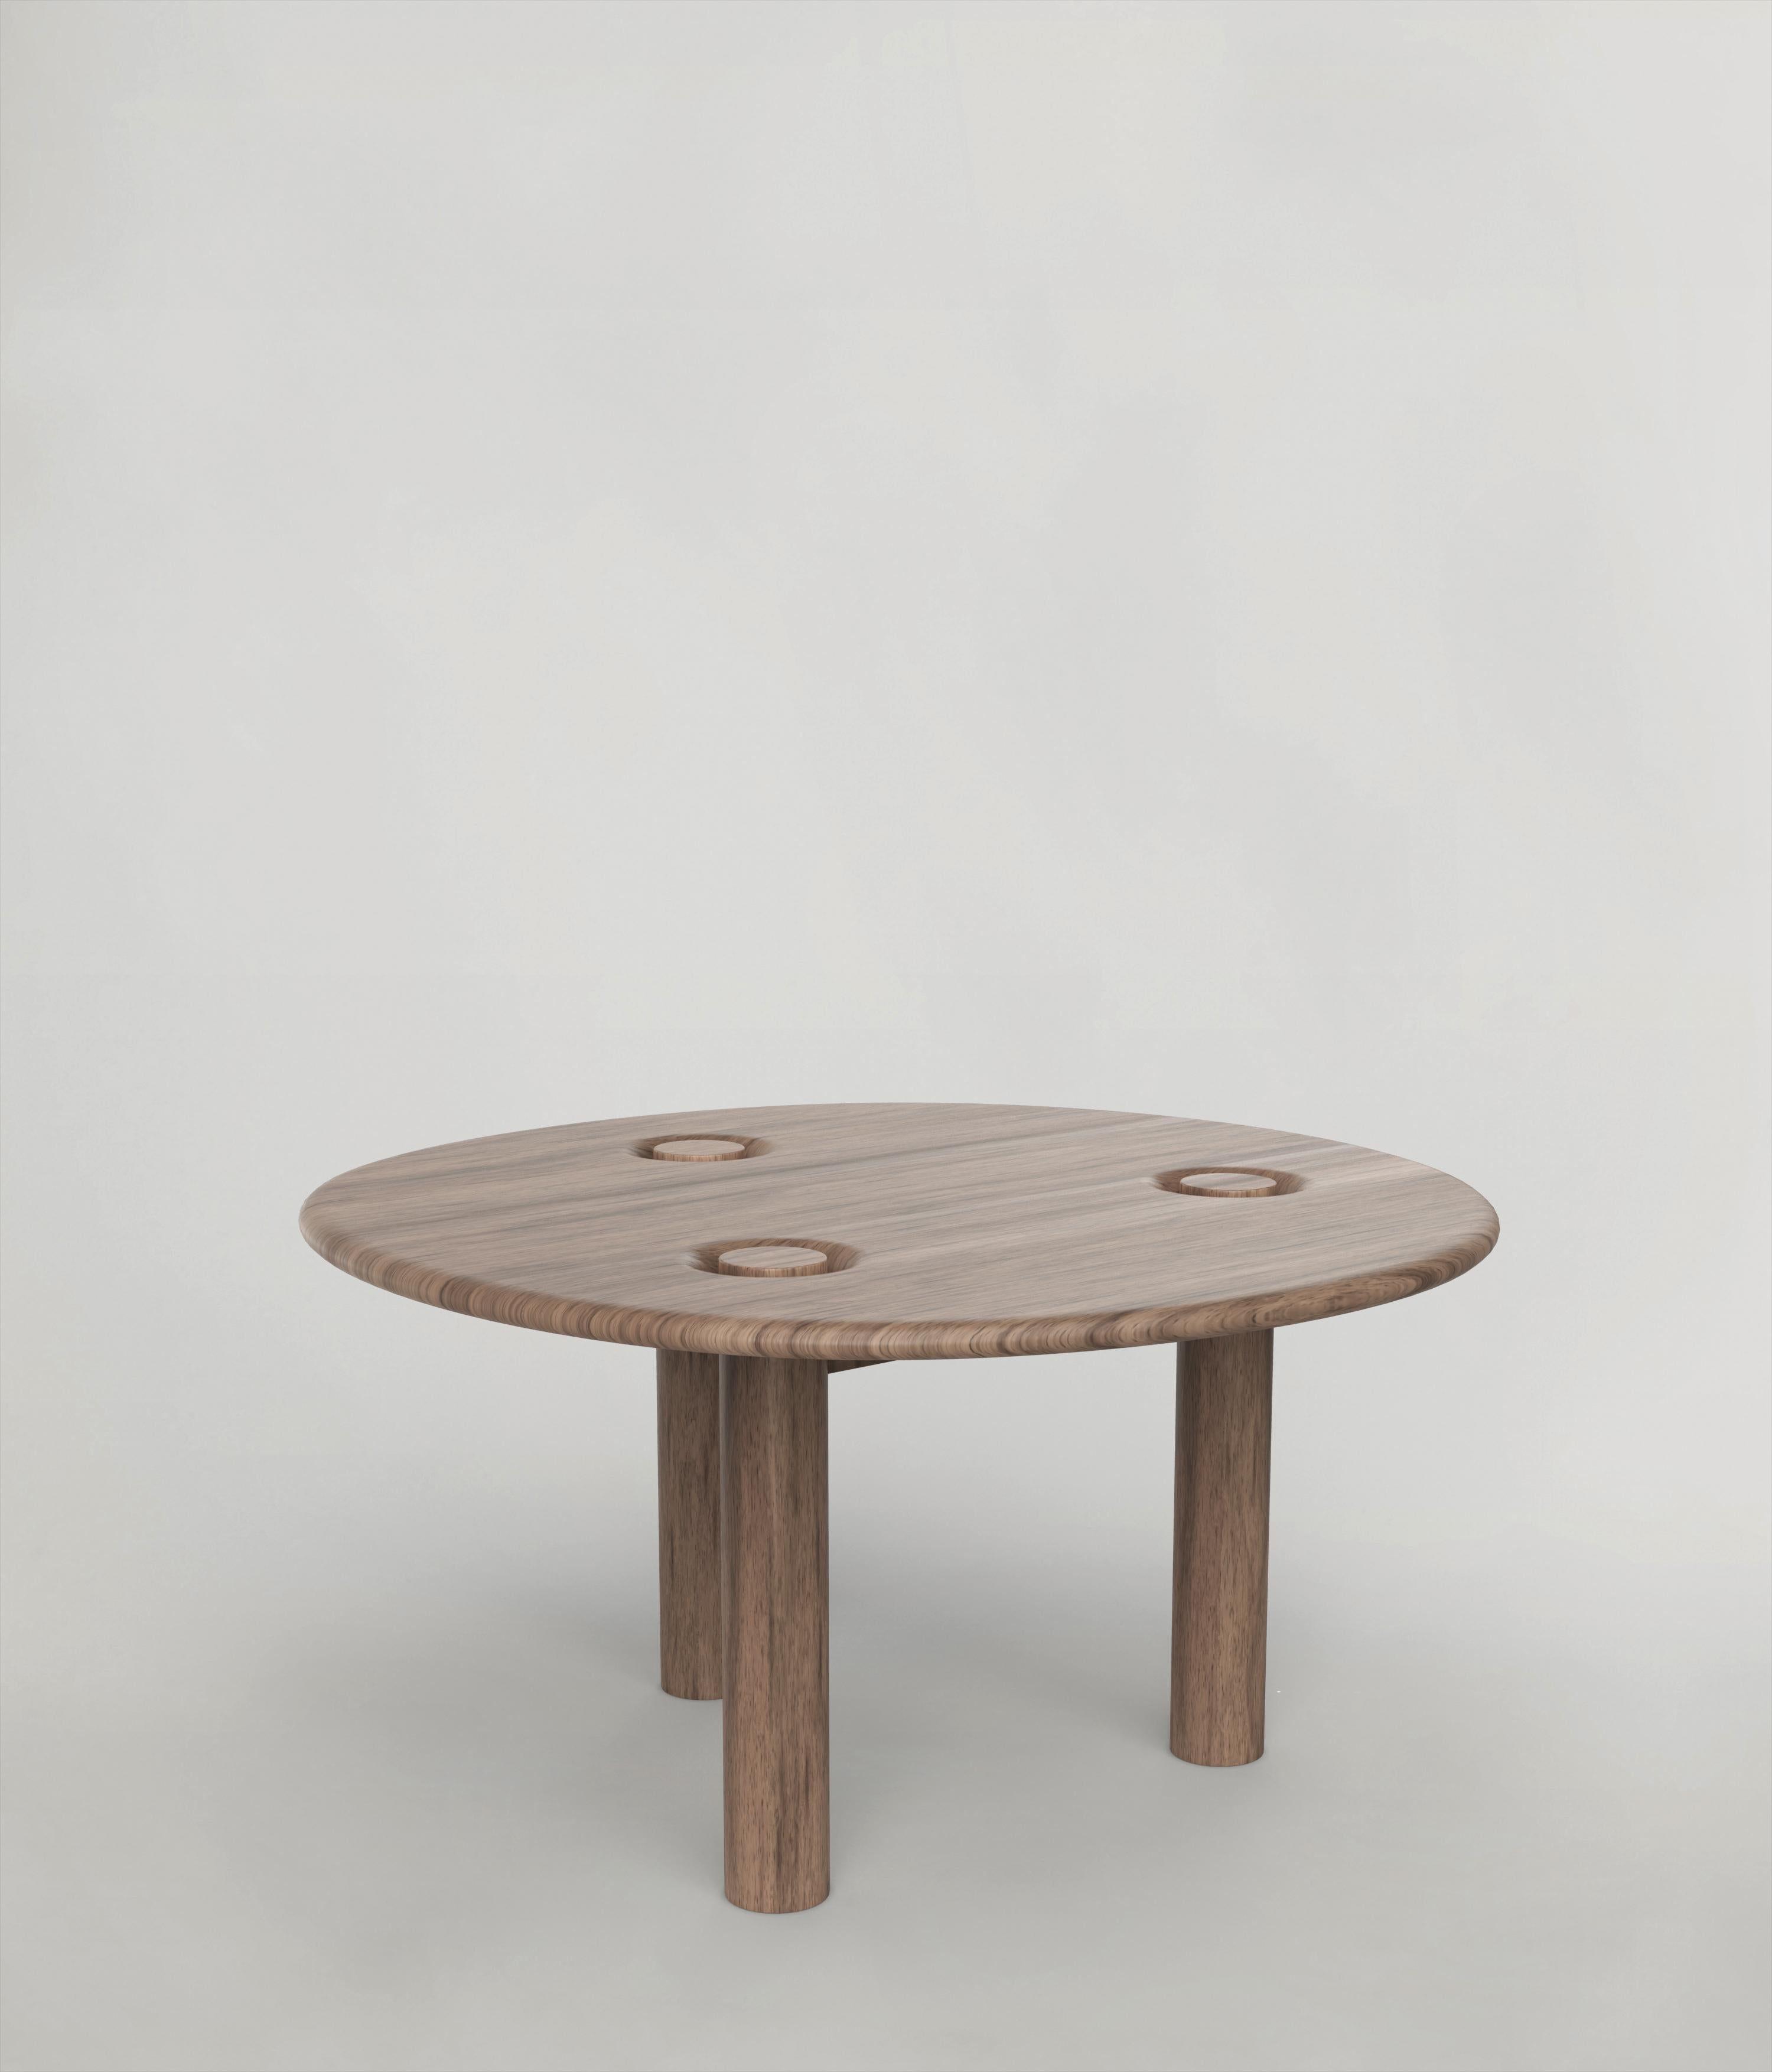 Contemporary Limited Edition Signed Wood Table, Asido V3 by Edizione Limitata In New Condition For Sale In Milano, IT